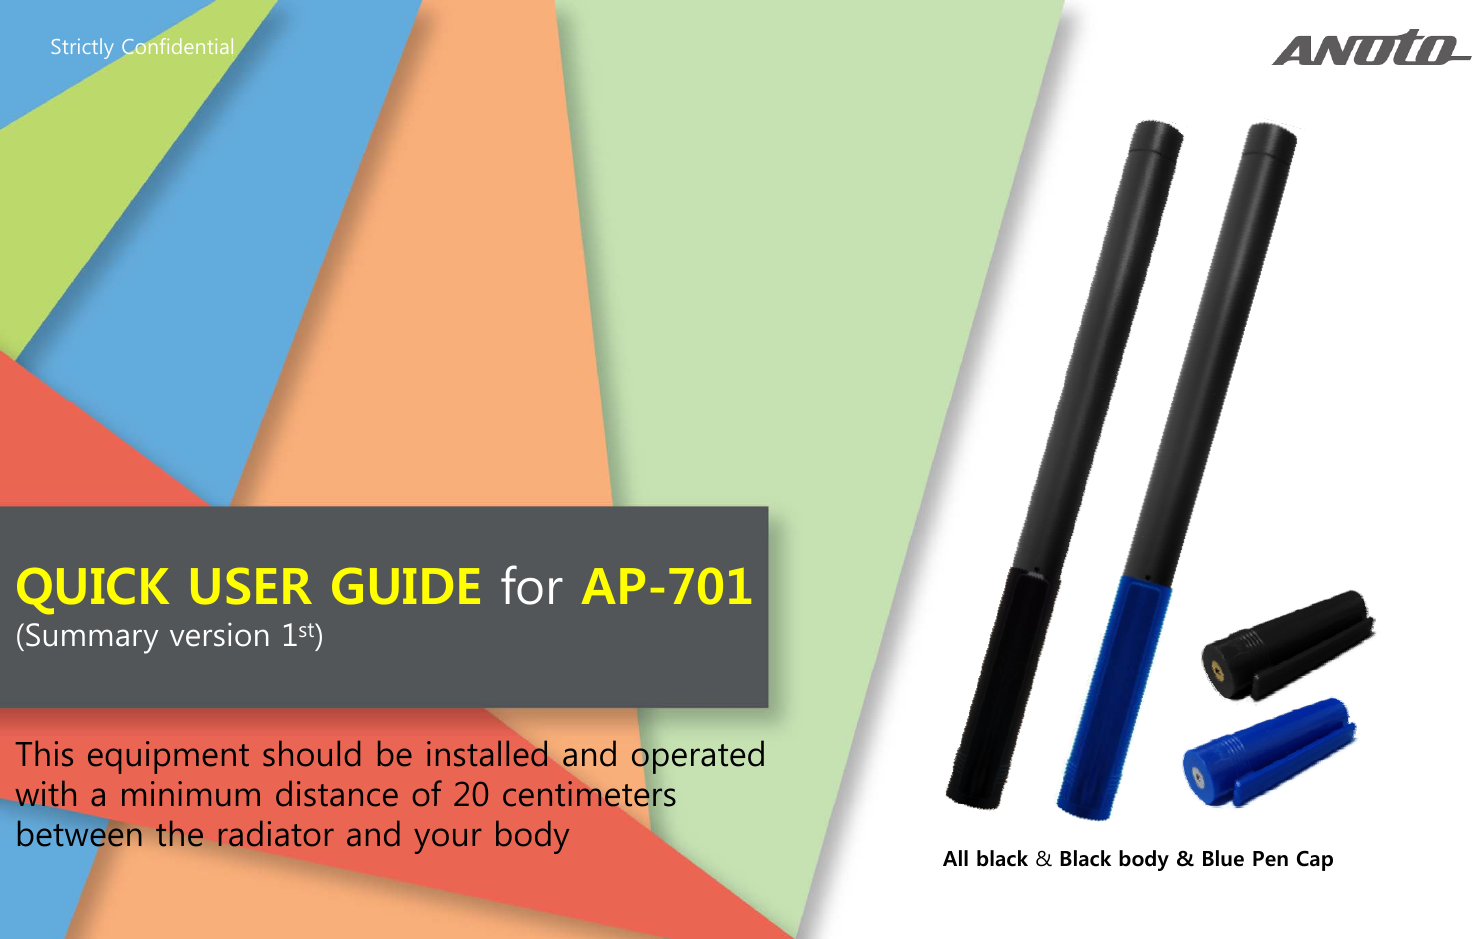 Strictly ConfidentialQUICK USER GUIDE for AP-701(Summary version 1st)This equipment should be installed and operated with a minimum distance of 20 centimetersAll black &amp; Black body &amp; Blue Pen Capwith a minimum distance of 20 centimeters between the radiator and your body